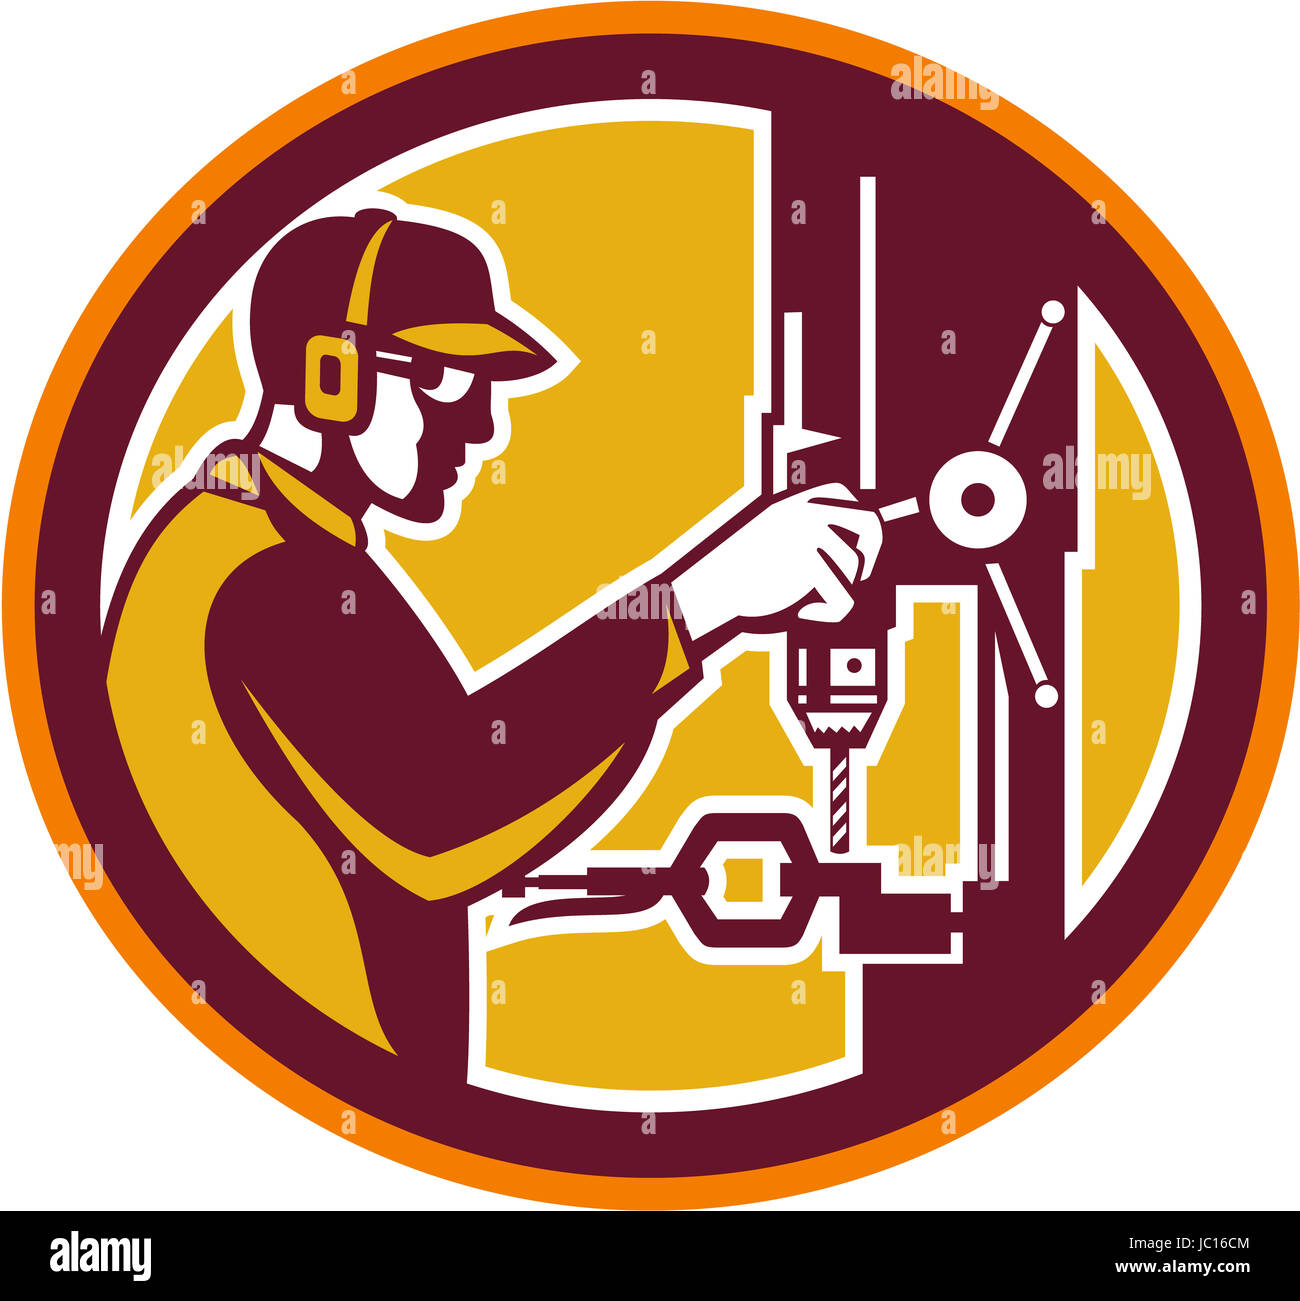 Illustration of a worker at work drilling with drill press viewed from side set inside circle done in retro style on isolated background. Stock Photo